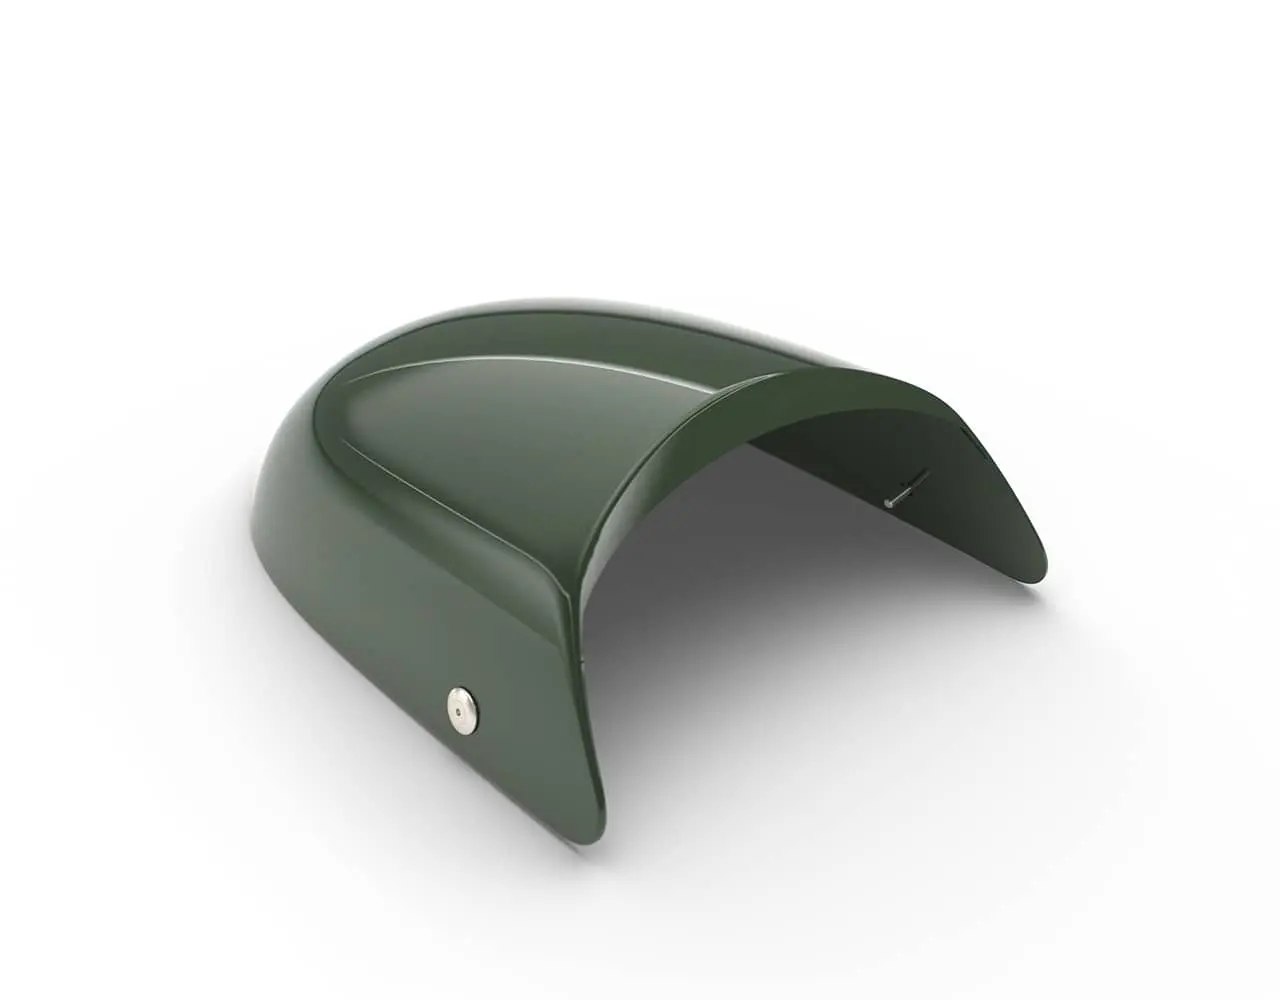 British Racing Green Dual Seat Cowl CONTINENTAL GT650 1990500 fits for Royal Enfield